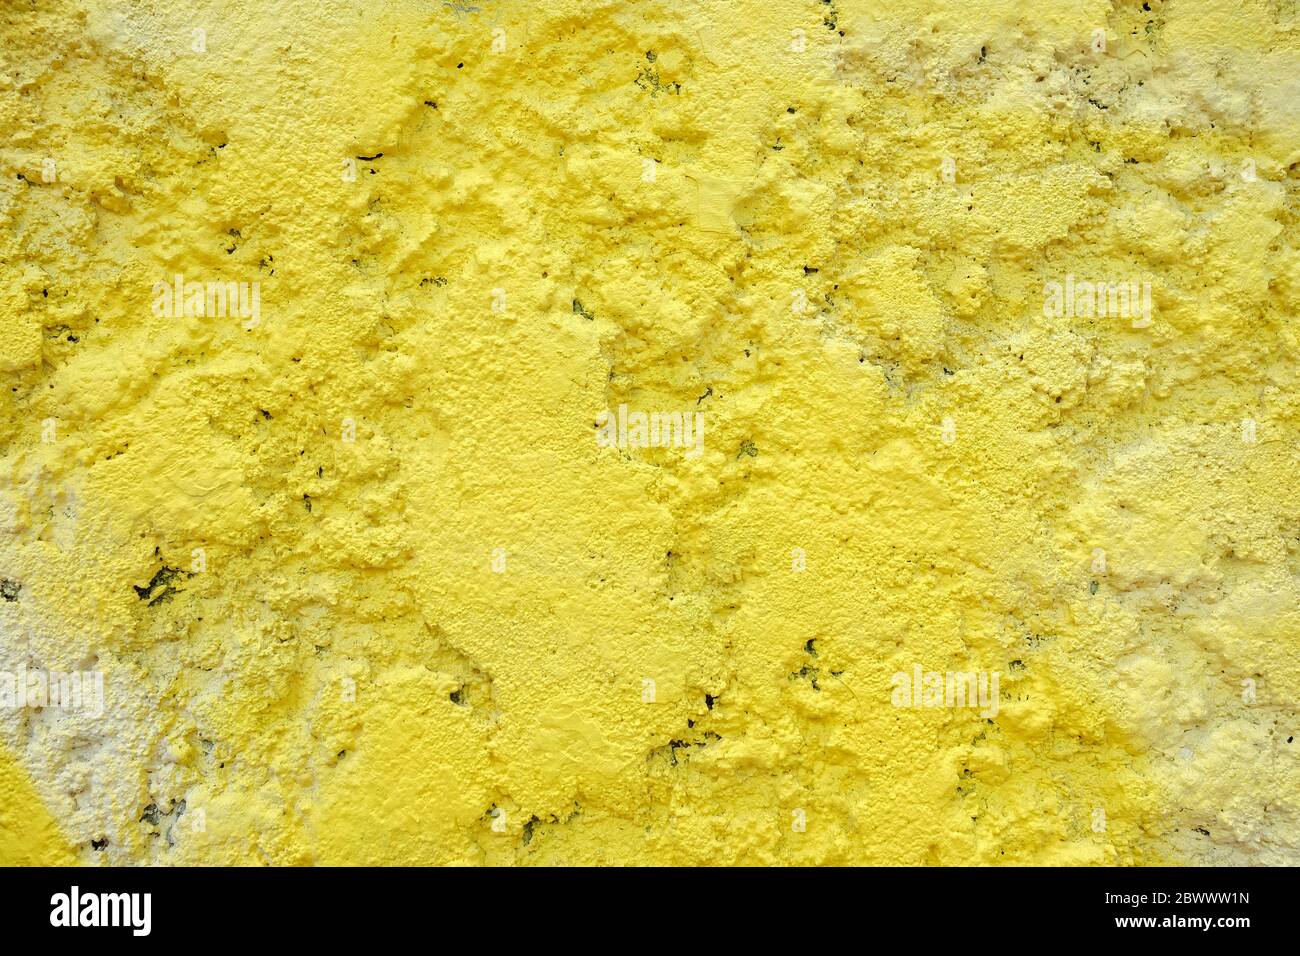 Yellow Spray Painting on Stucco Wall Texture Background. Stock Photo